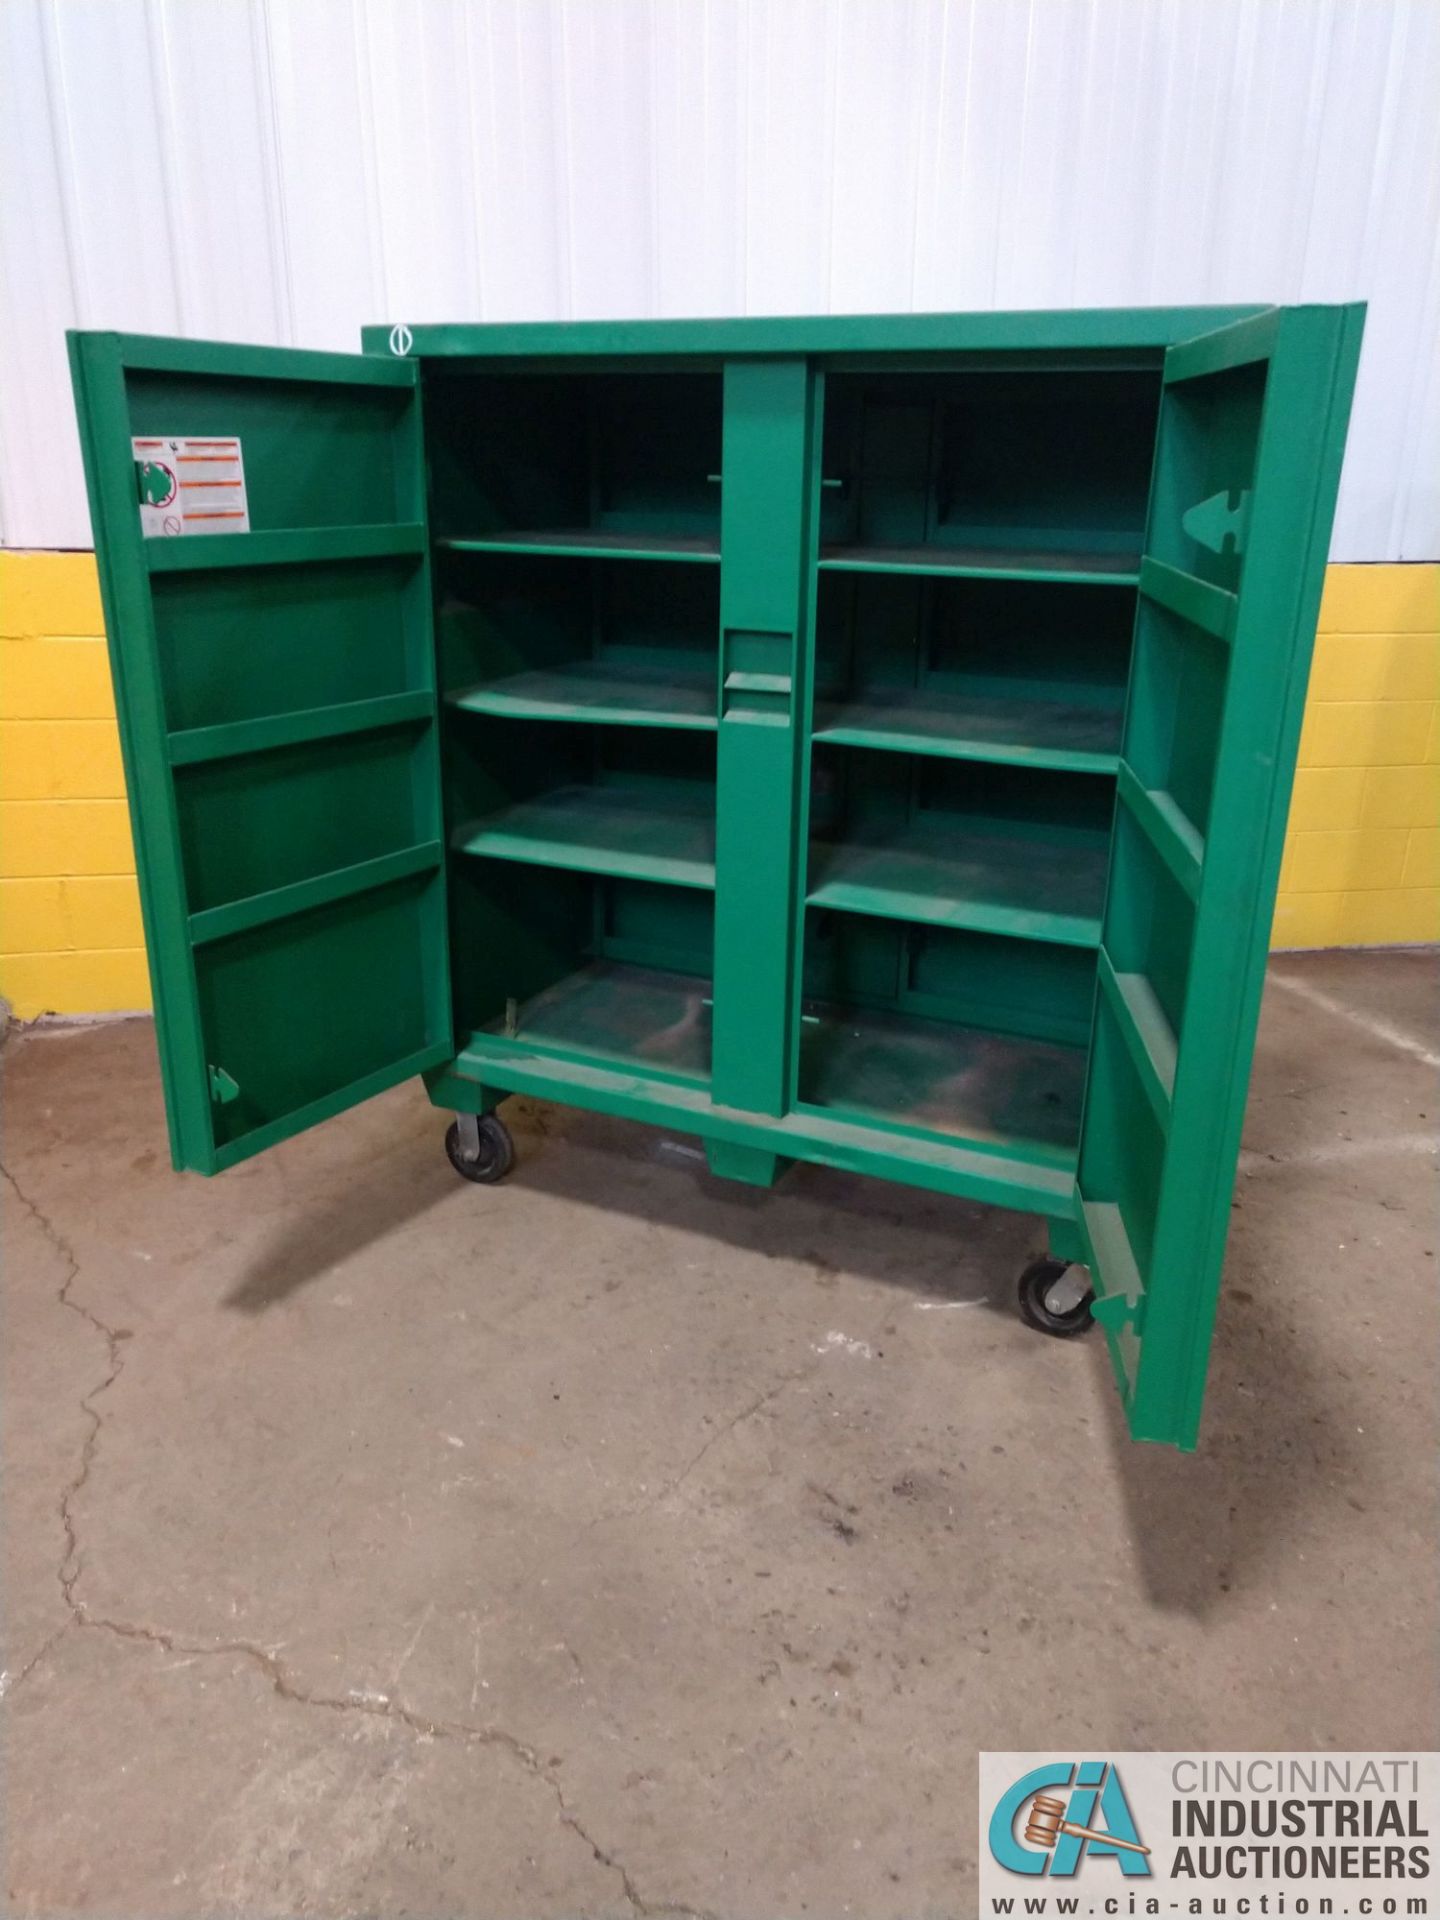 30" X 60" X 67" GREENLEE PORTABLE JOBOX CABINET ON CASTERS **LOCATED AT 1400 OAK ST., TOLEDO,